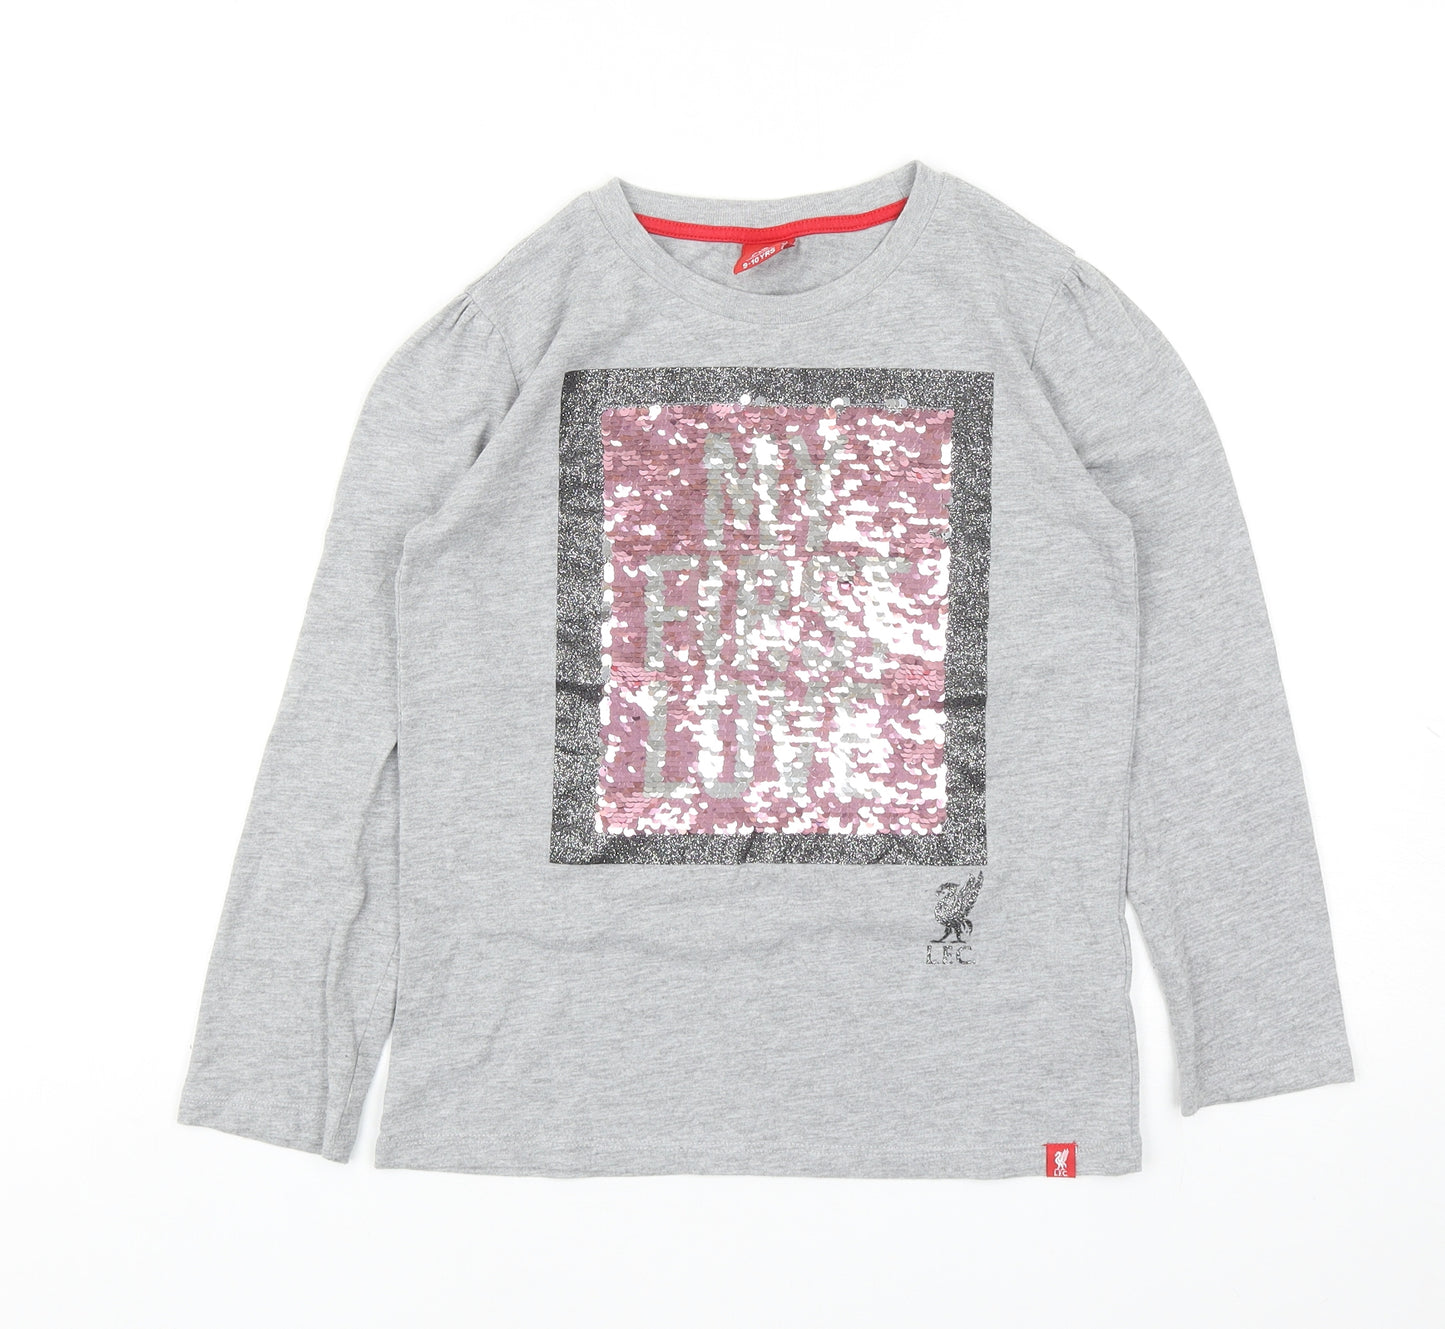 Liverpool FC Girls Grey Cotton Basic Casual Size 9-10 Years Round Neck Pullover - Liverpool FC